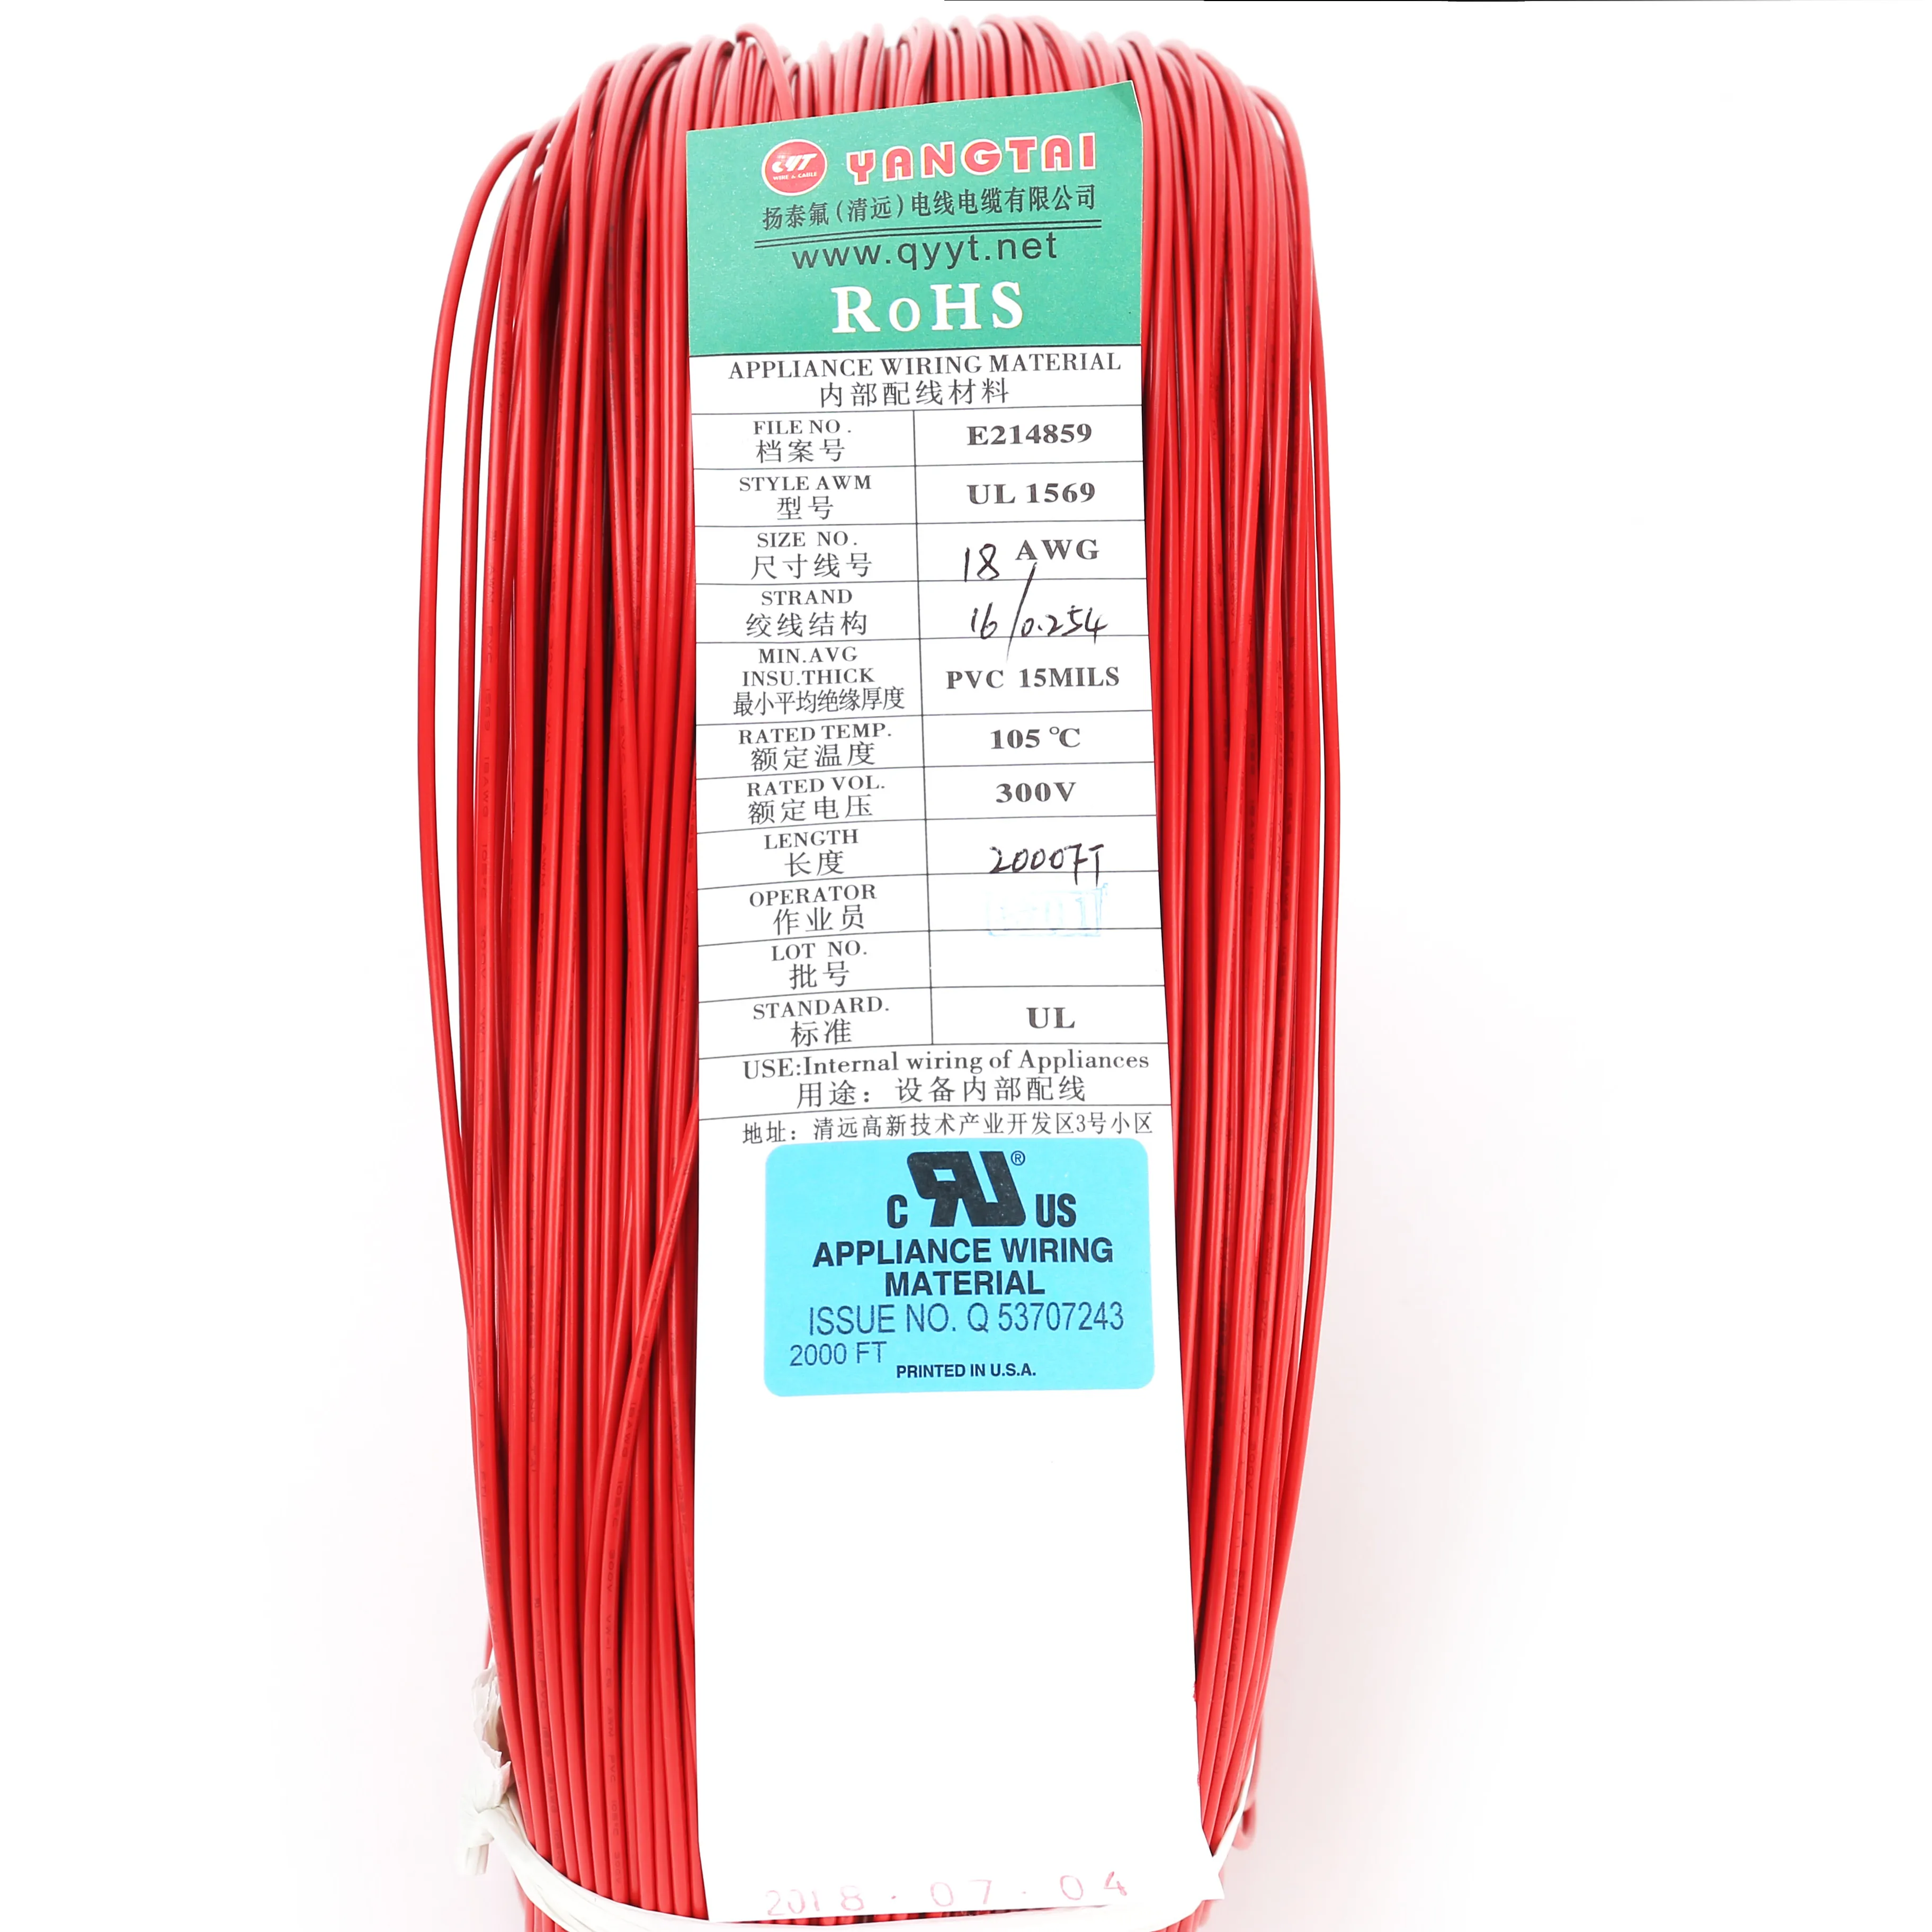 Flexible wire UL1569 18AWG 300 Voltage pvc types of electrical wires and cables